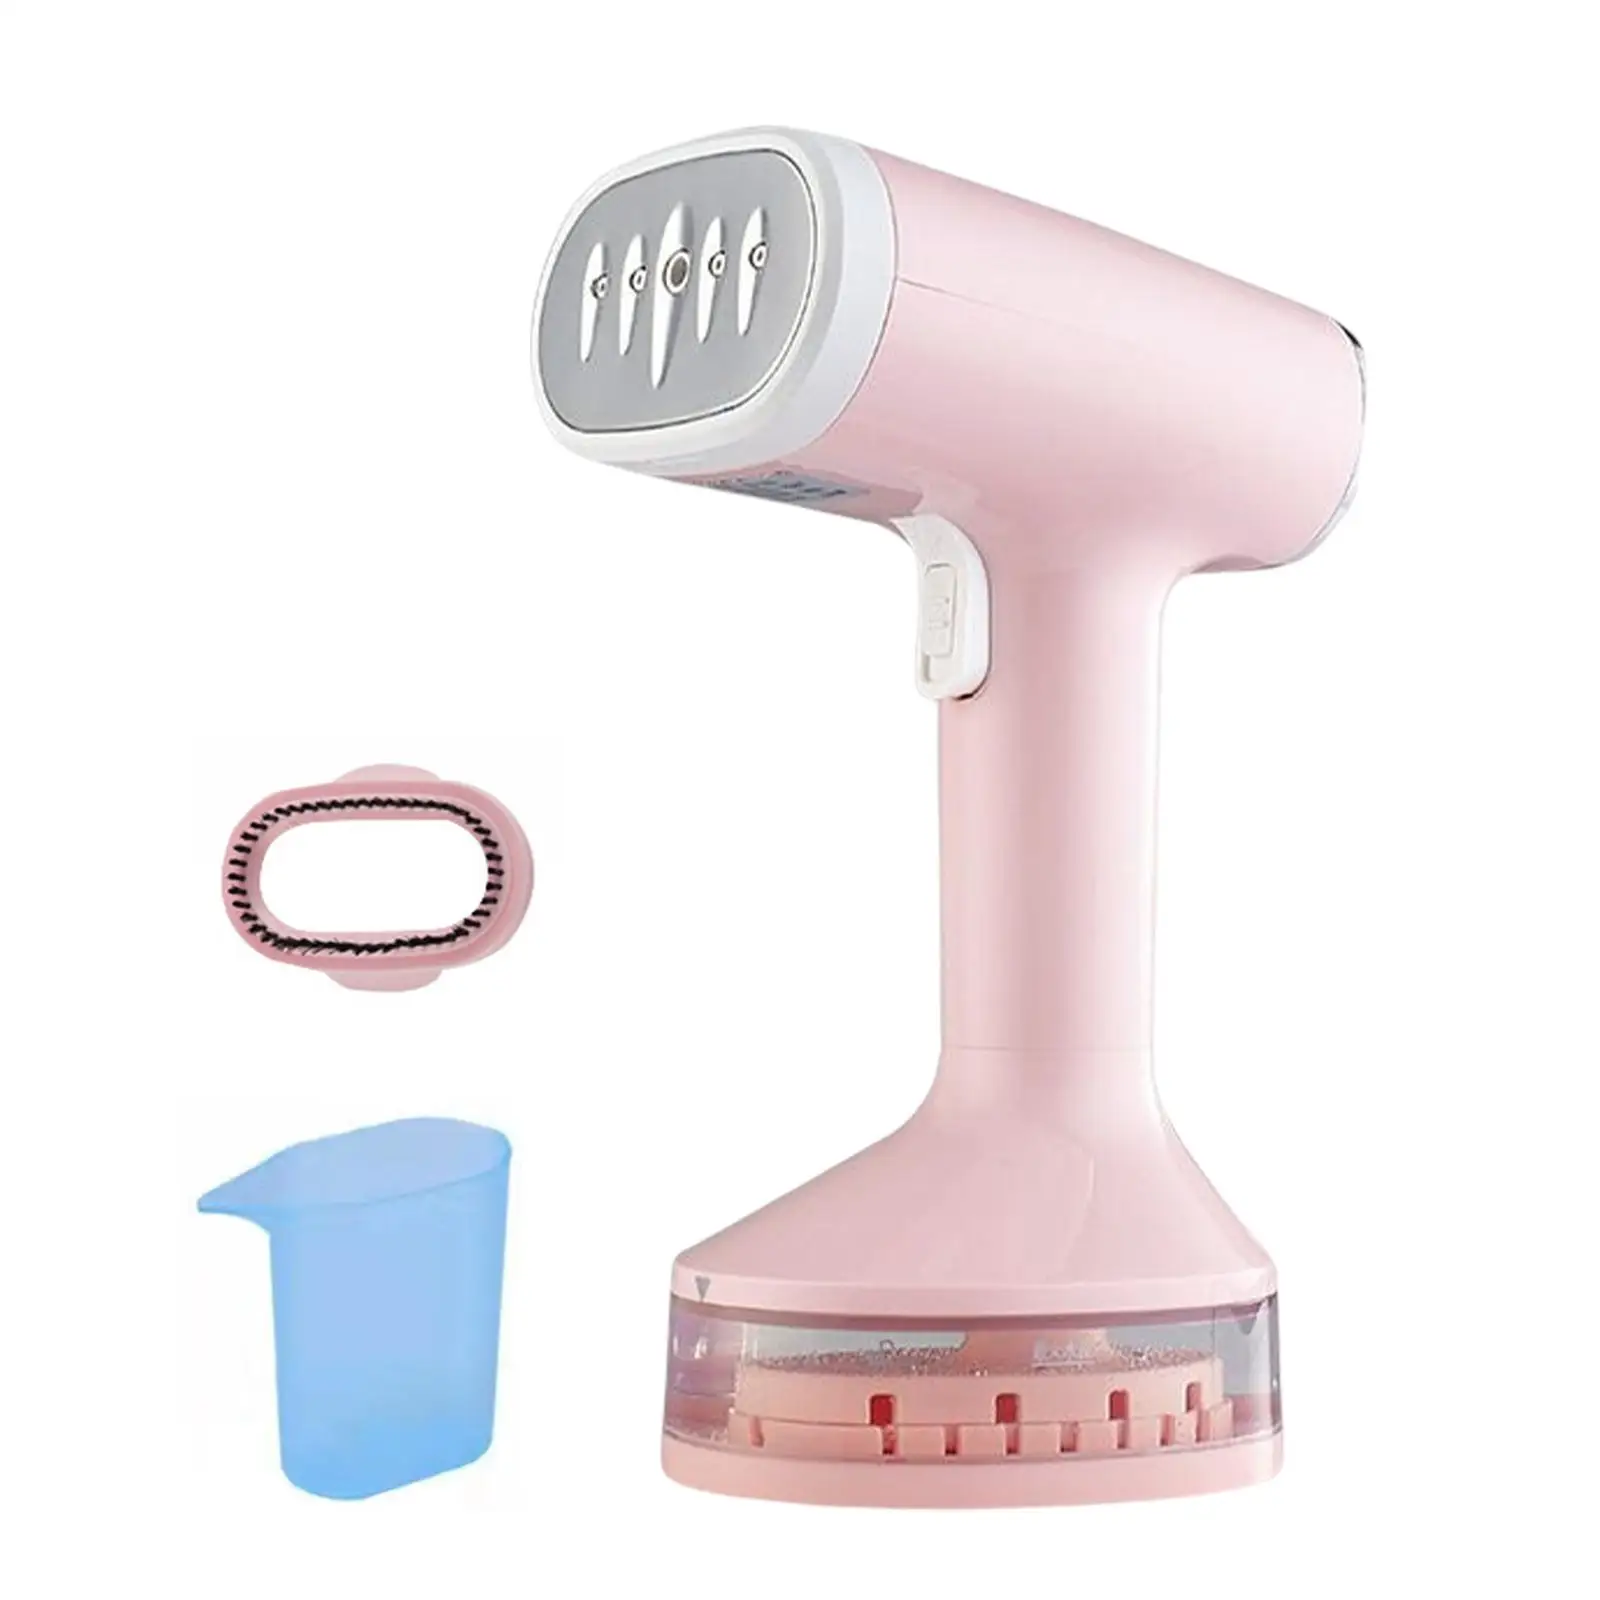 Professional Handheld Clothes Steamer fast heating with 140ml Water Tank Portable Ironing Machine for Household Outing Dormitory